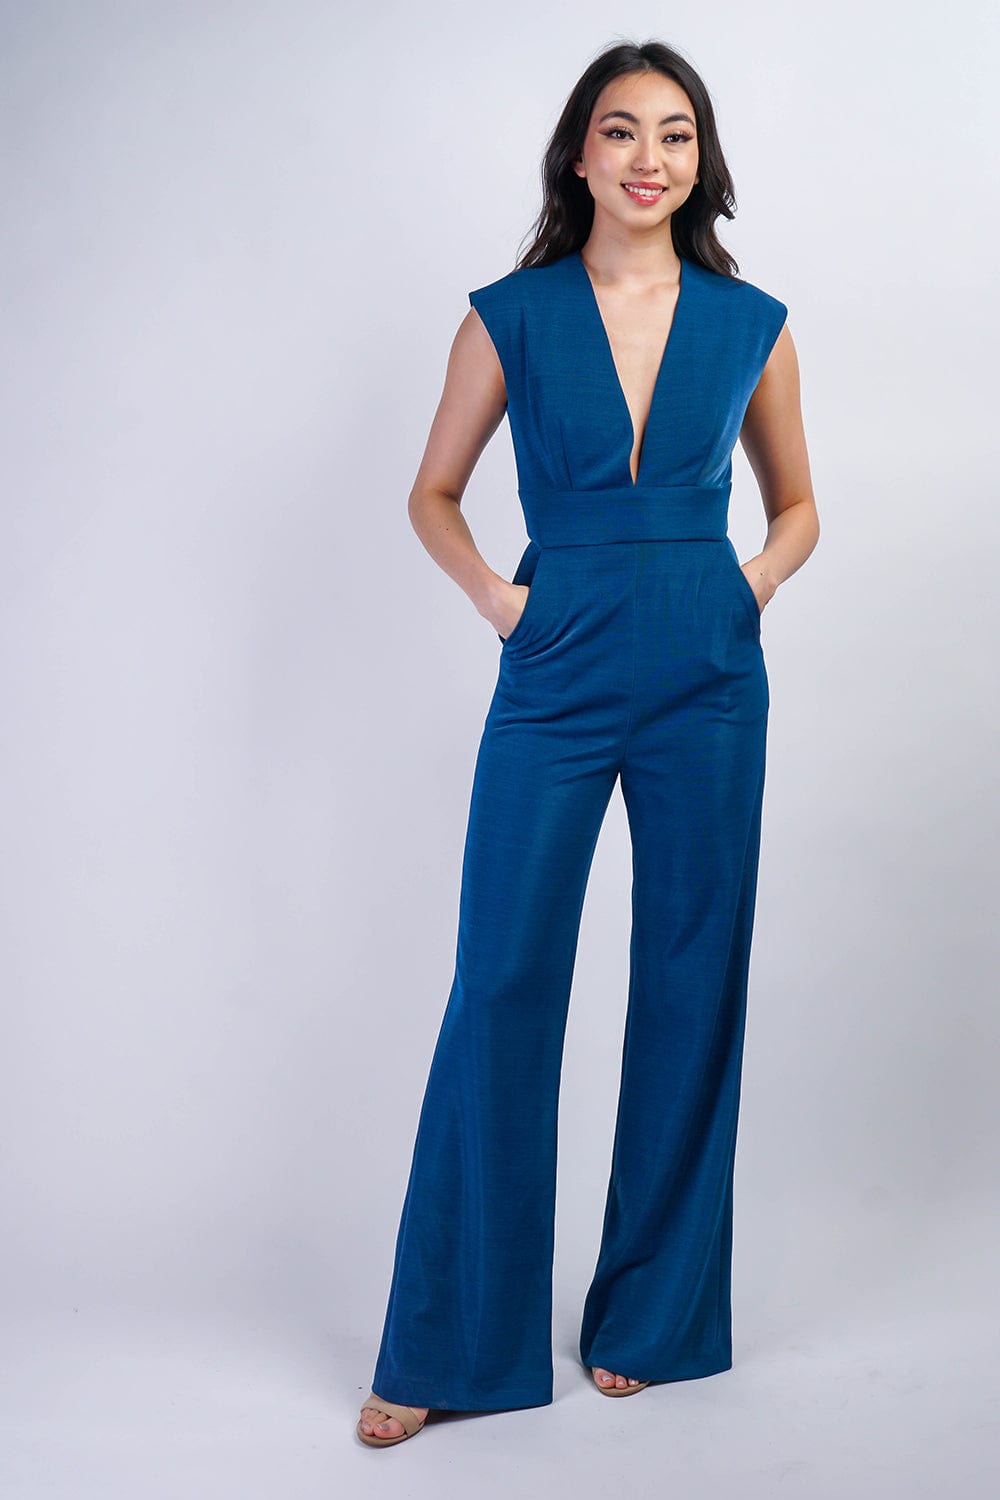 Chloe Dao JUMPSUITS &amp; ROMPERS Saphire Blue Luxe V Neck Aiden Jumpsuit